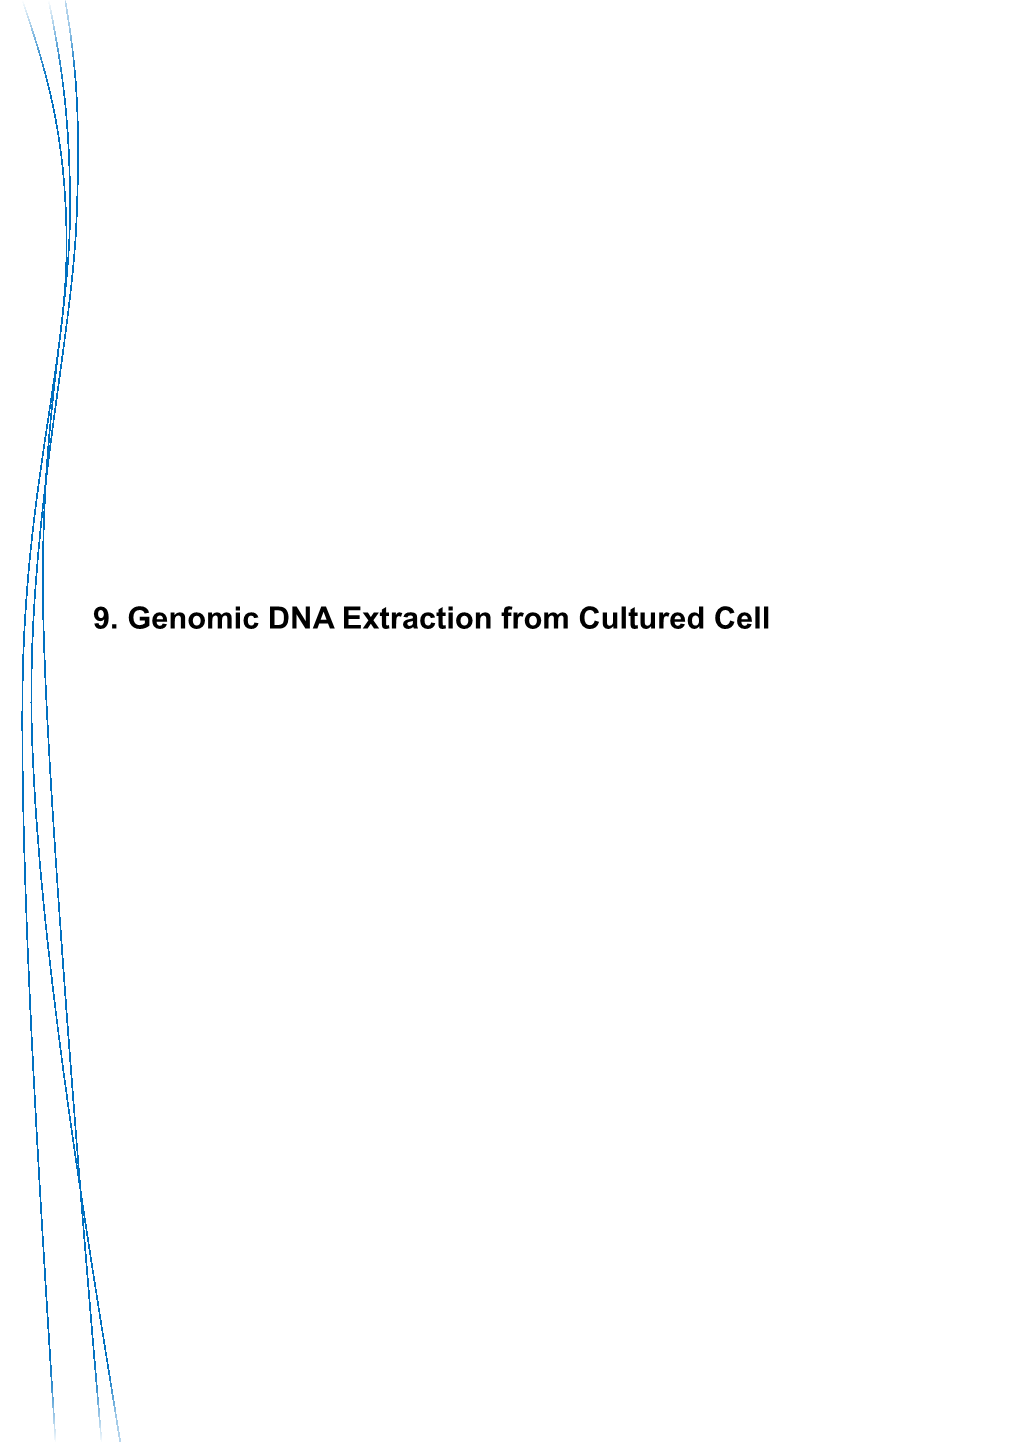 9. Genomic DNA Extraction from Cultured Cell